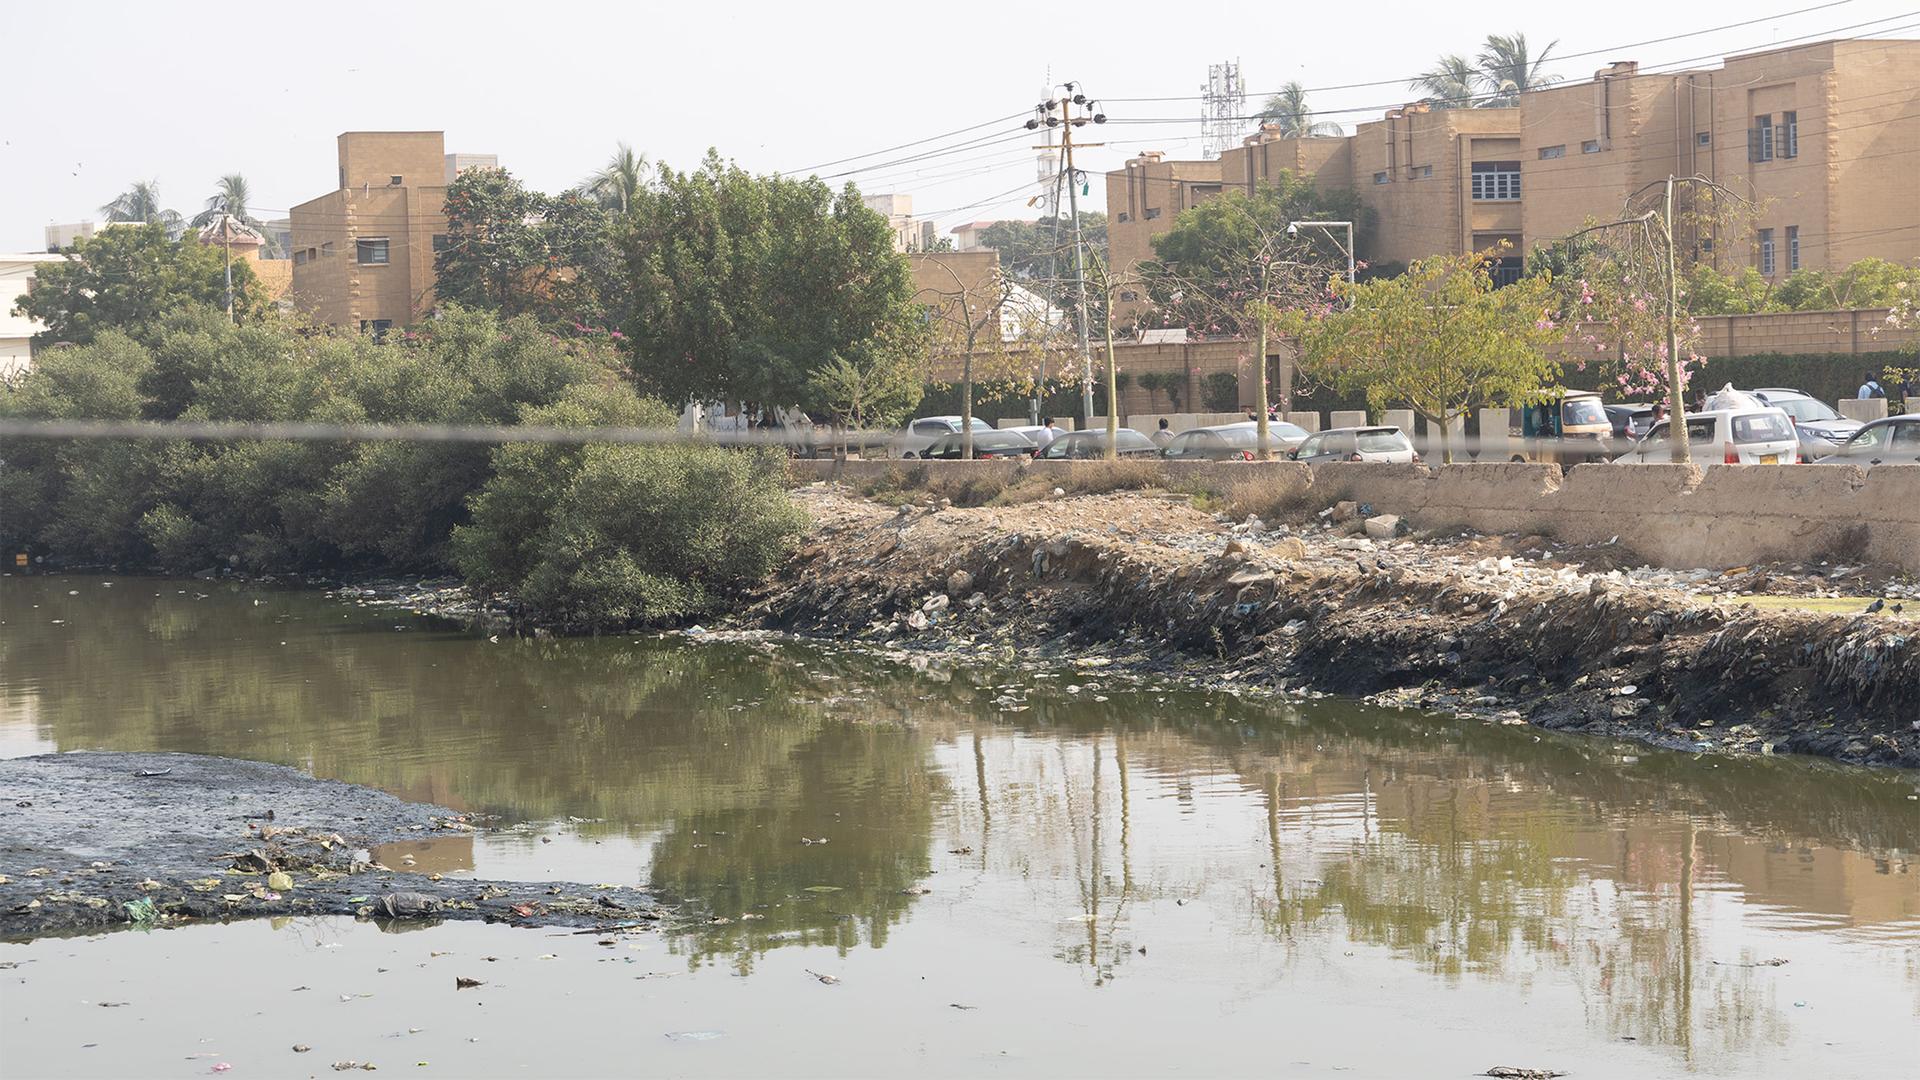 The Nehr-i-Khayyam drainage ditch in Karachi, Pakistan, where sewage and trash collect and can impede the flow of stormwater.